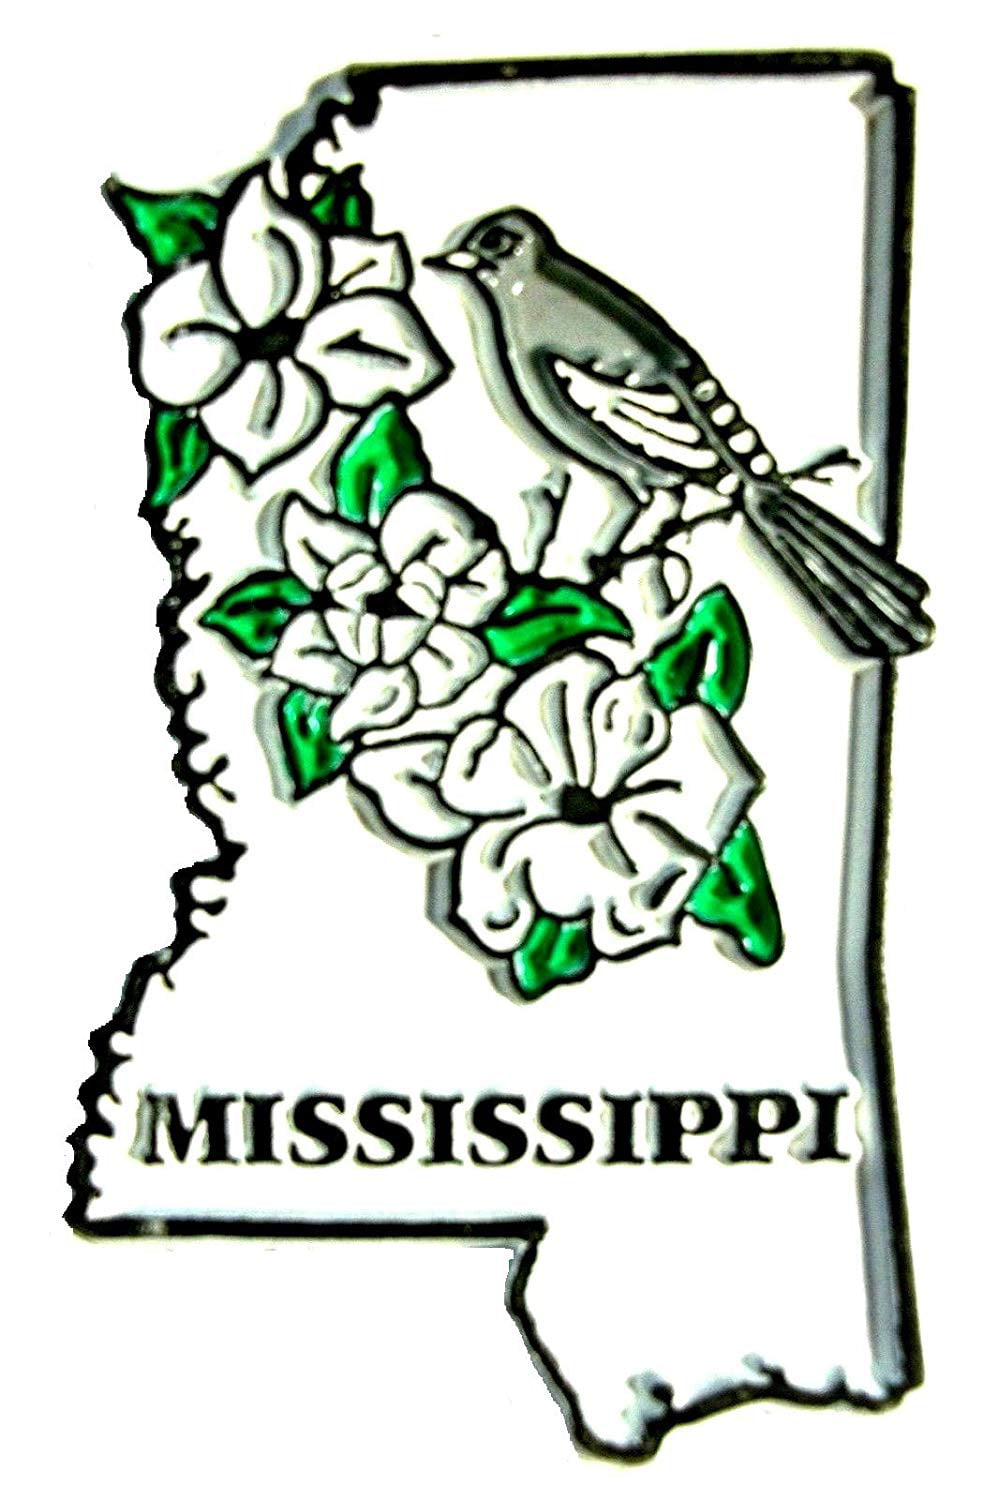 for invites UNused US postage stamps Mockingbird Magnolia Flag Bear State collecting The Mississippi Collection mail art